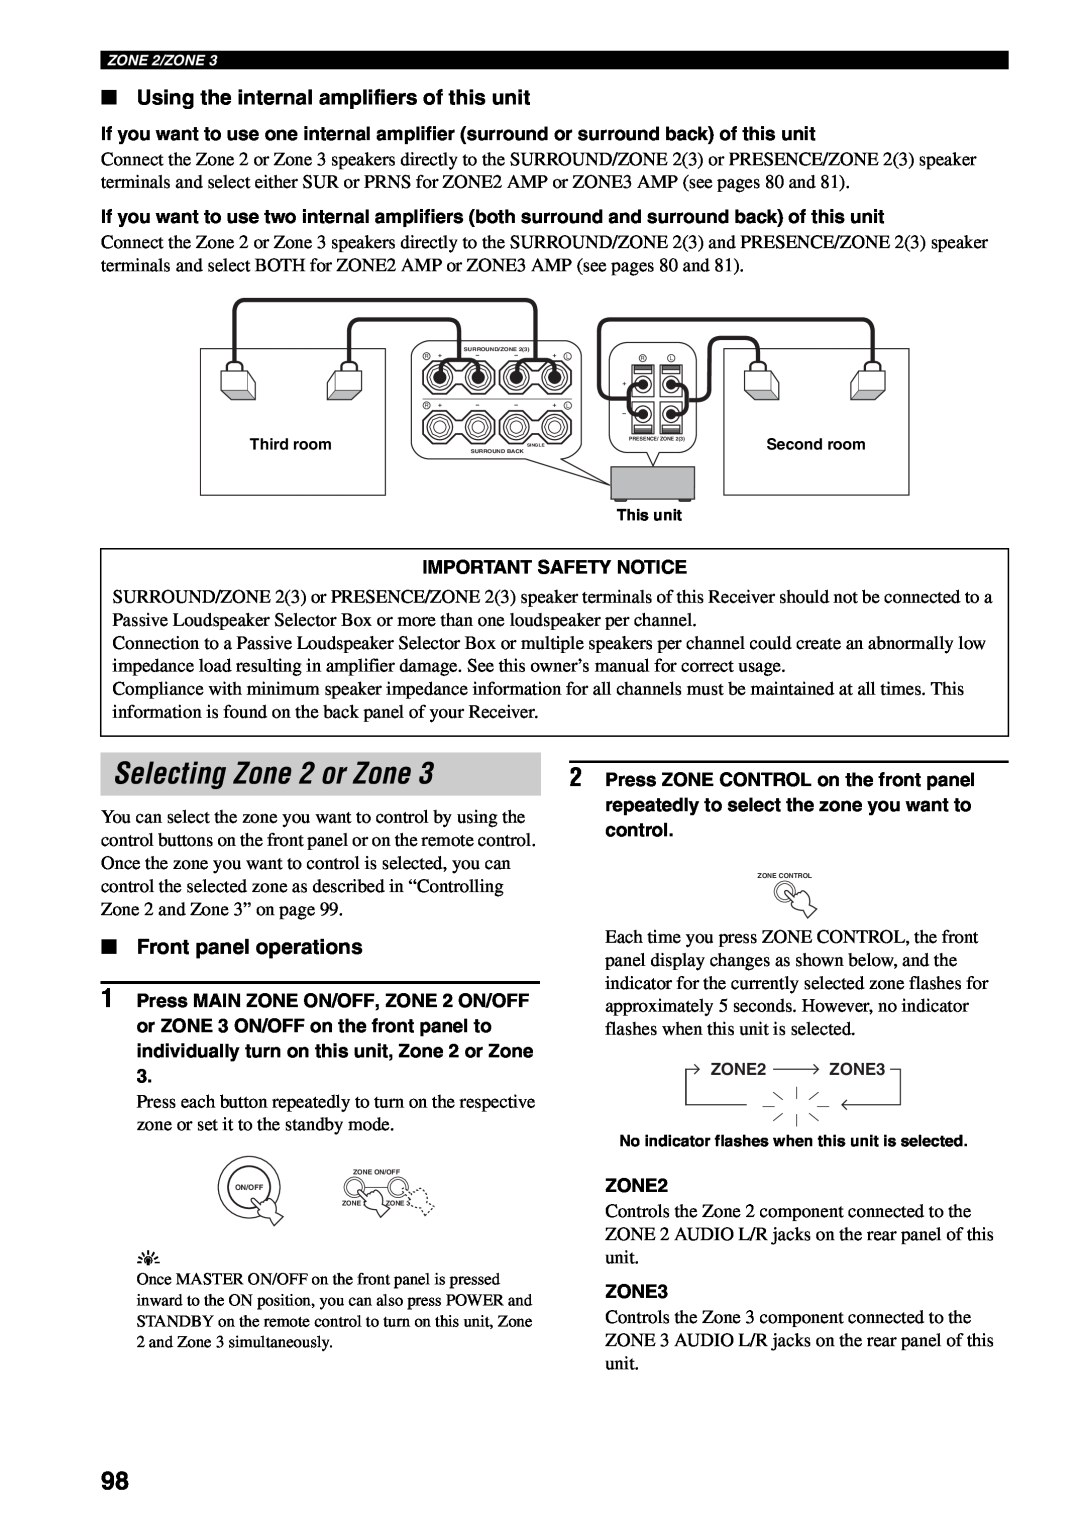 Yamaha RX-V1600 owner manual Selecting Zone 2 or Zone, Using the internal amplifiers of this unit, Front panel operations 